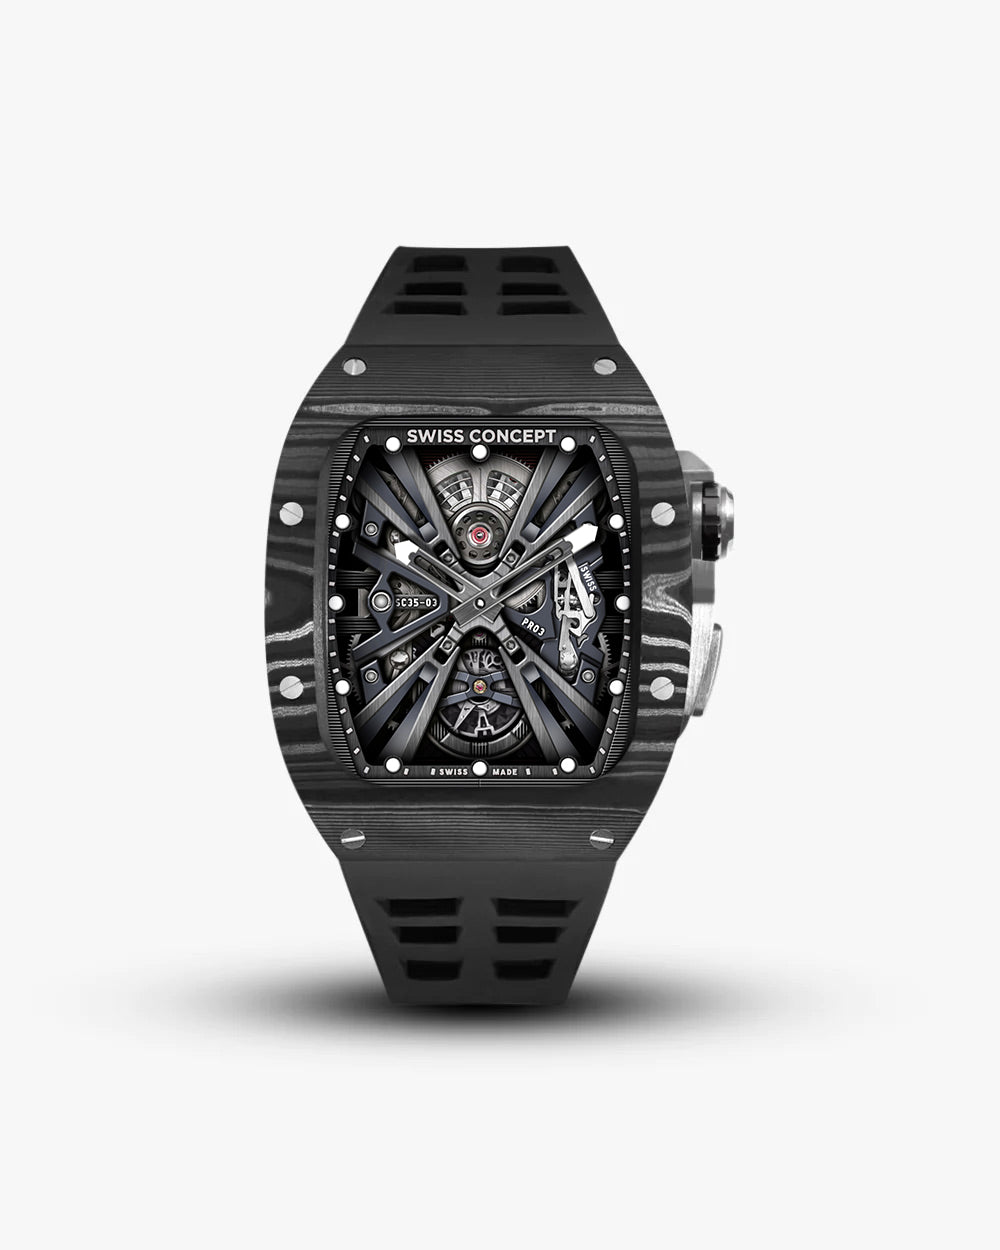 Swiss Concept Racing Elite Edition Nero Forged Carbon, Stainless Steel & Onyx Black Apple Watch Case - Swiss Design